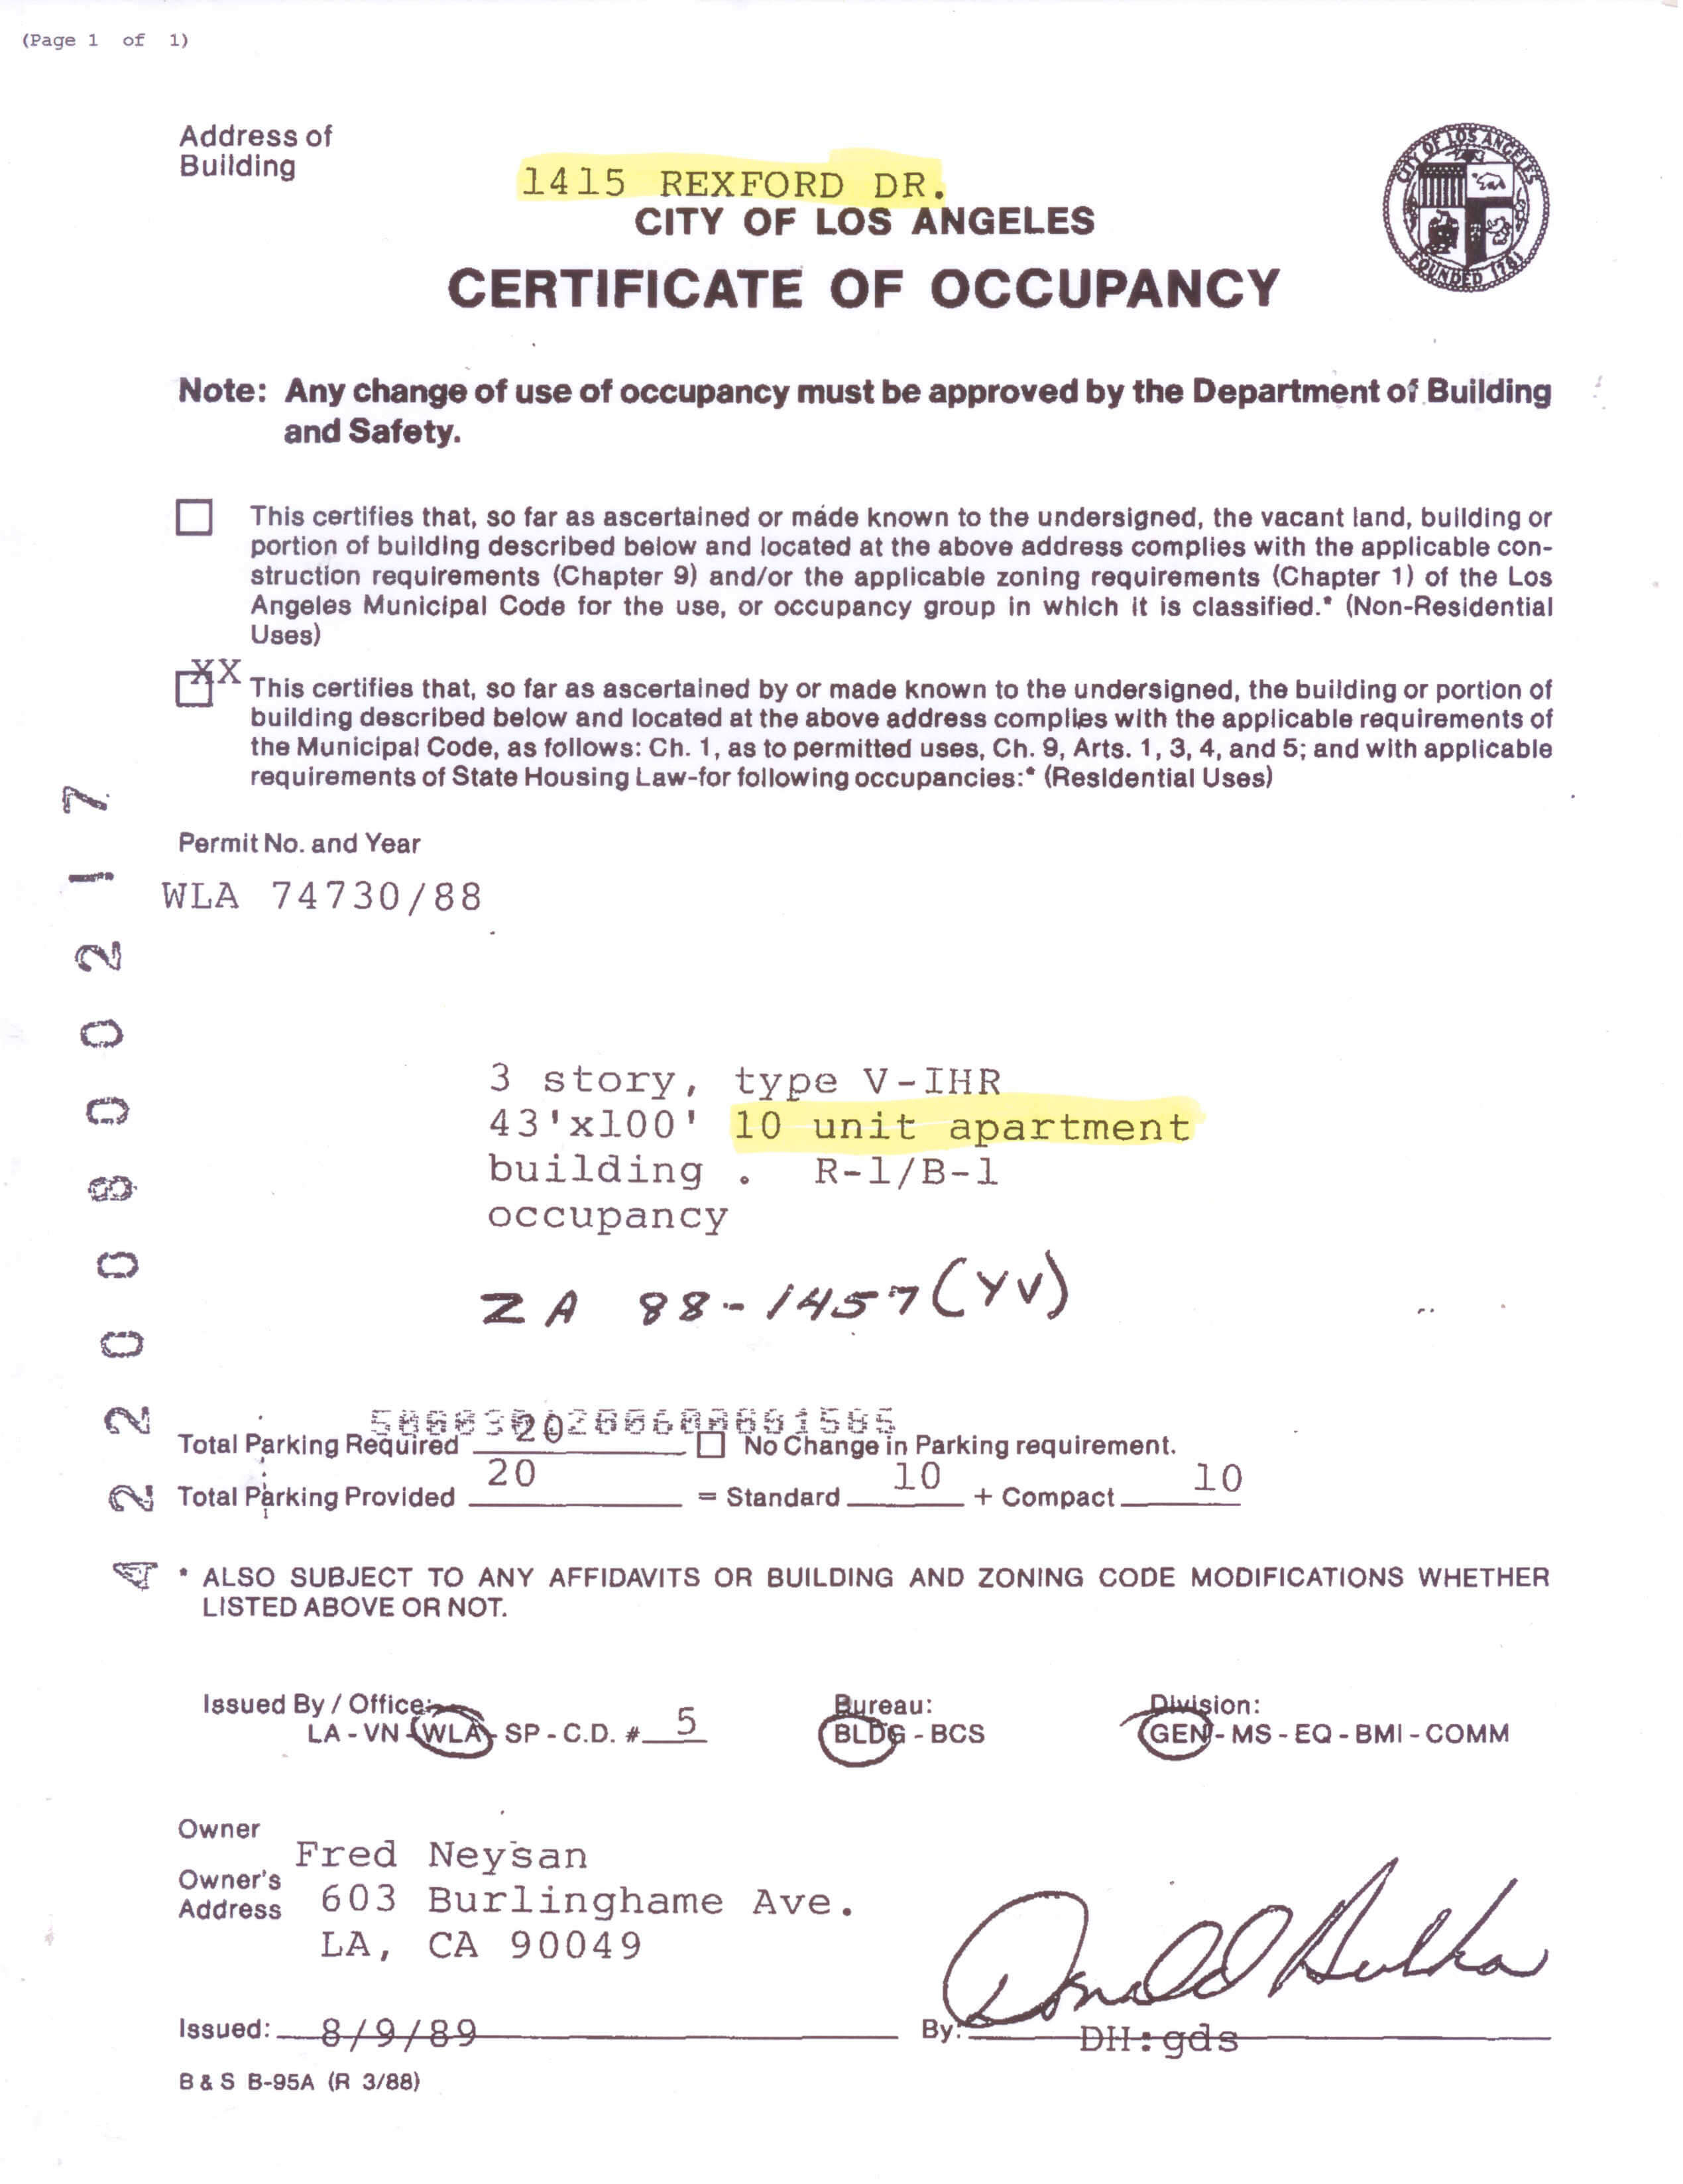 Material requirement form Certificate of occupancy for rentals